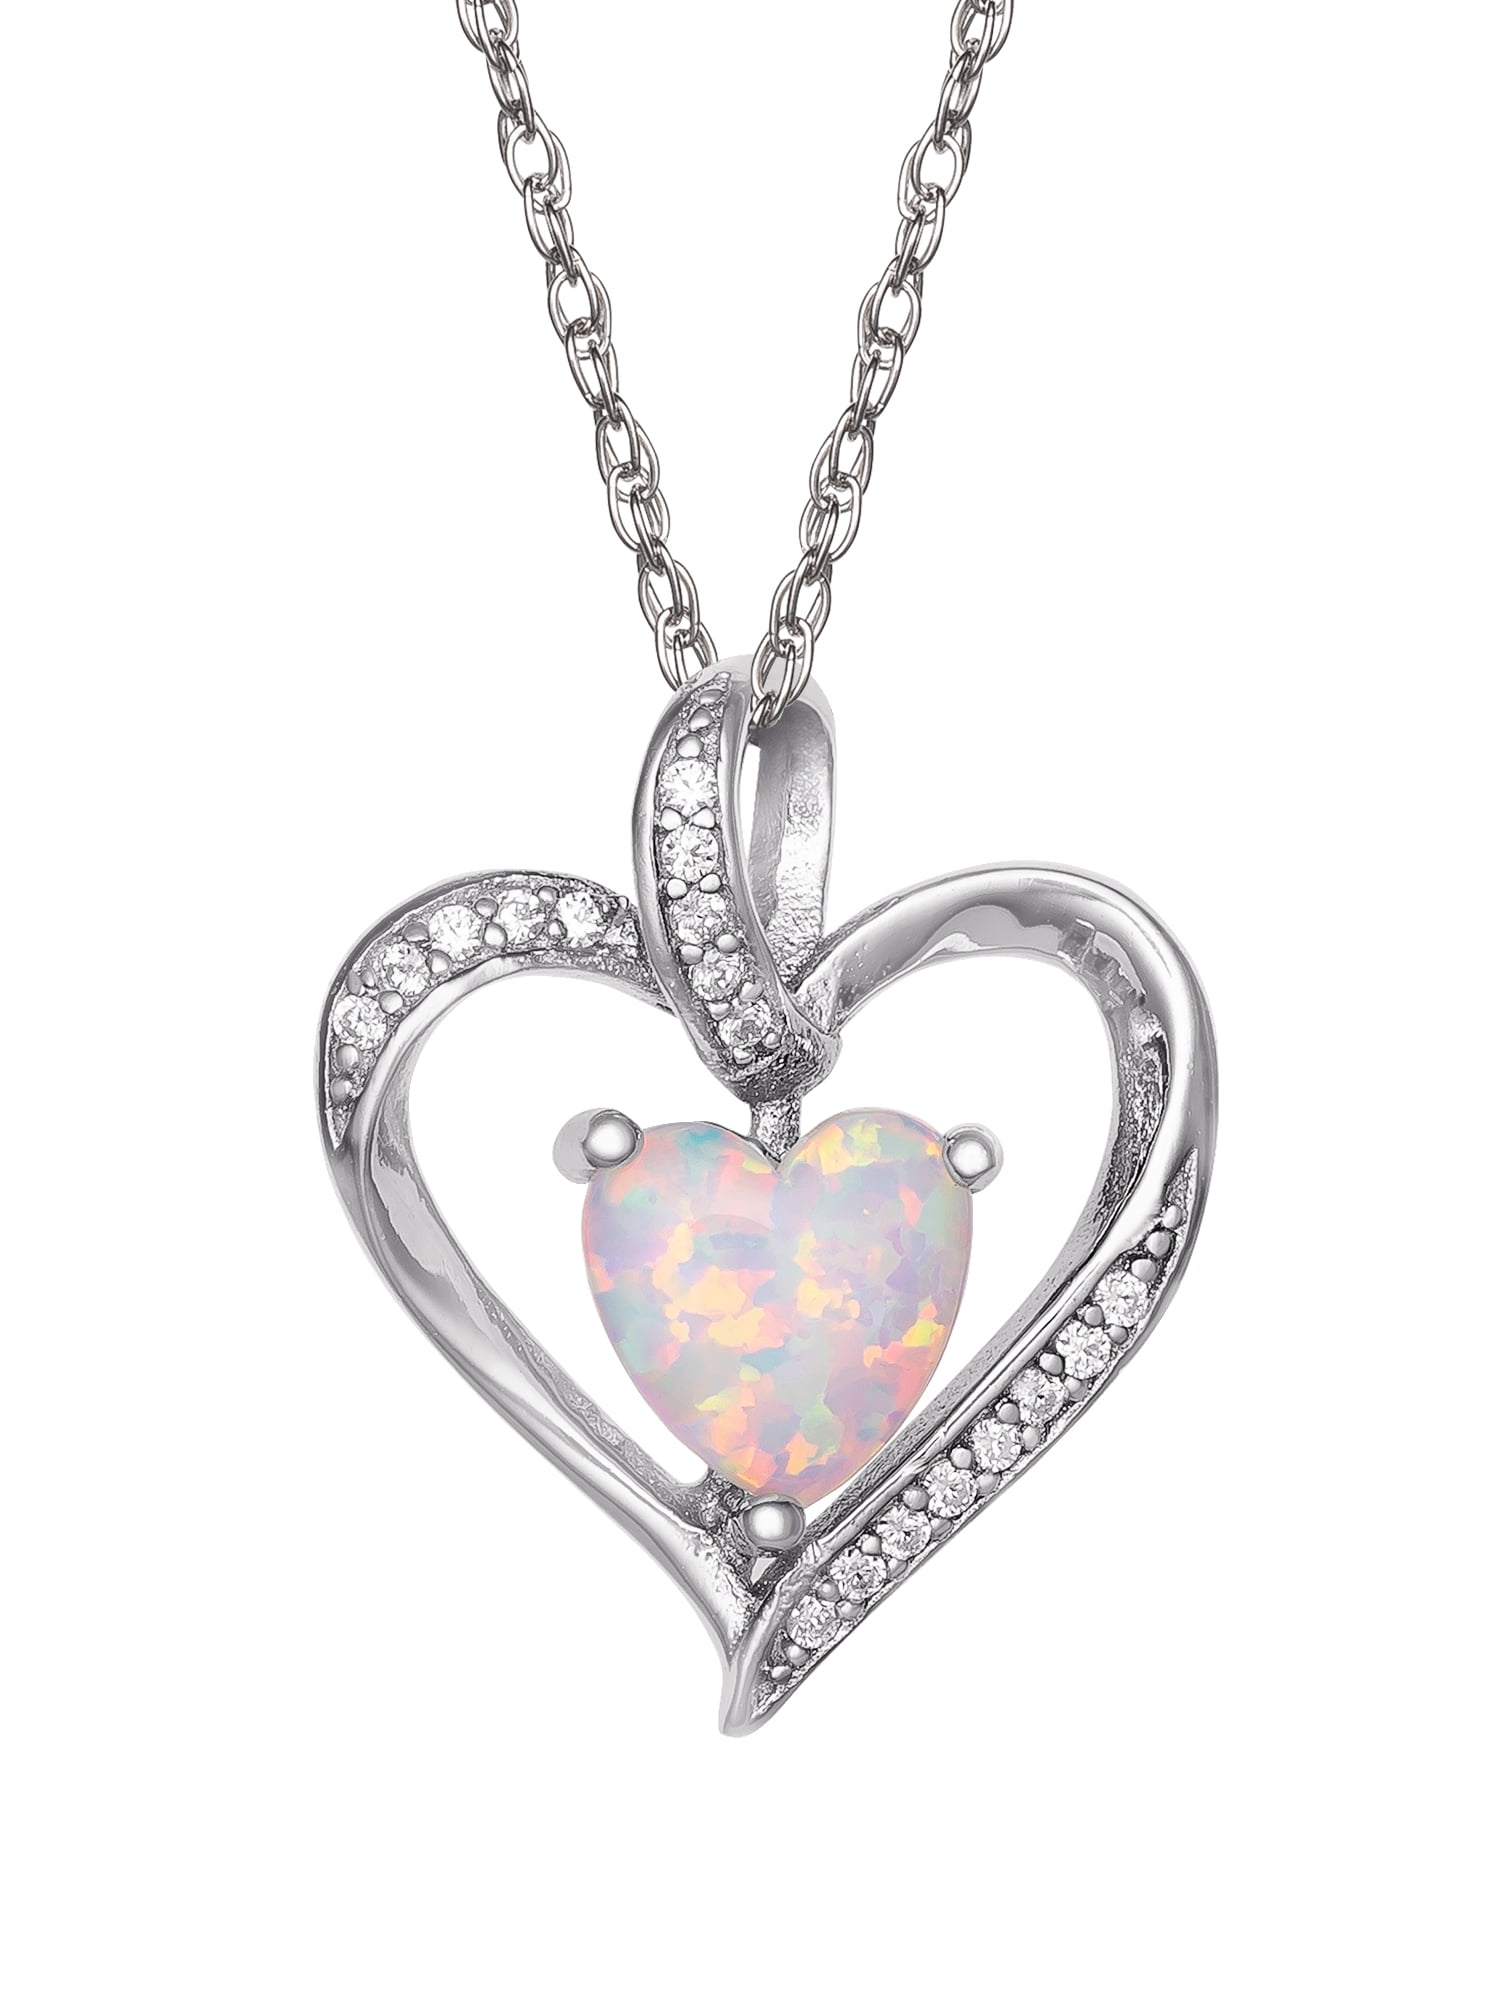 Jewel Zone US 0.18 Ct Round Cubic Zirconia Fashion Heart Pendant Necklace in14K Gold Over Sterling Silver 